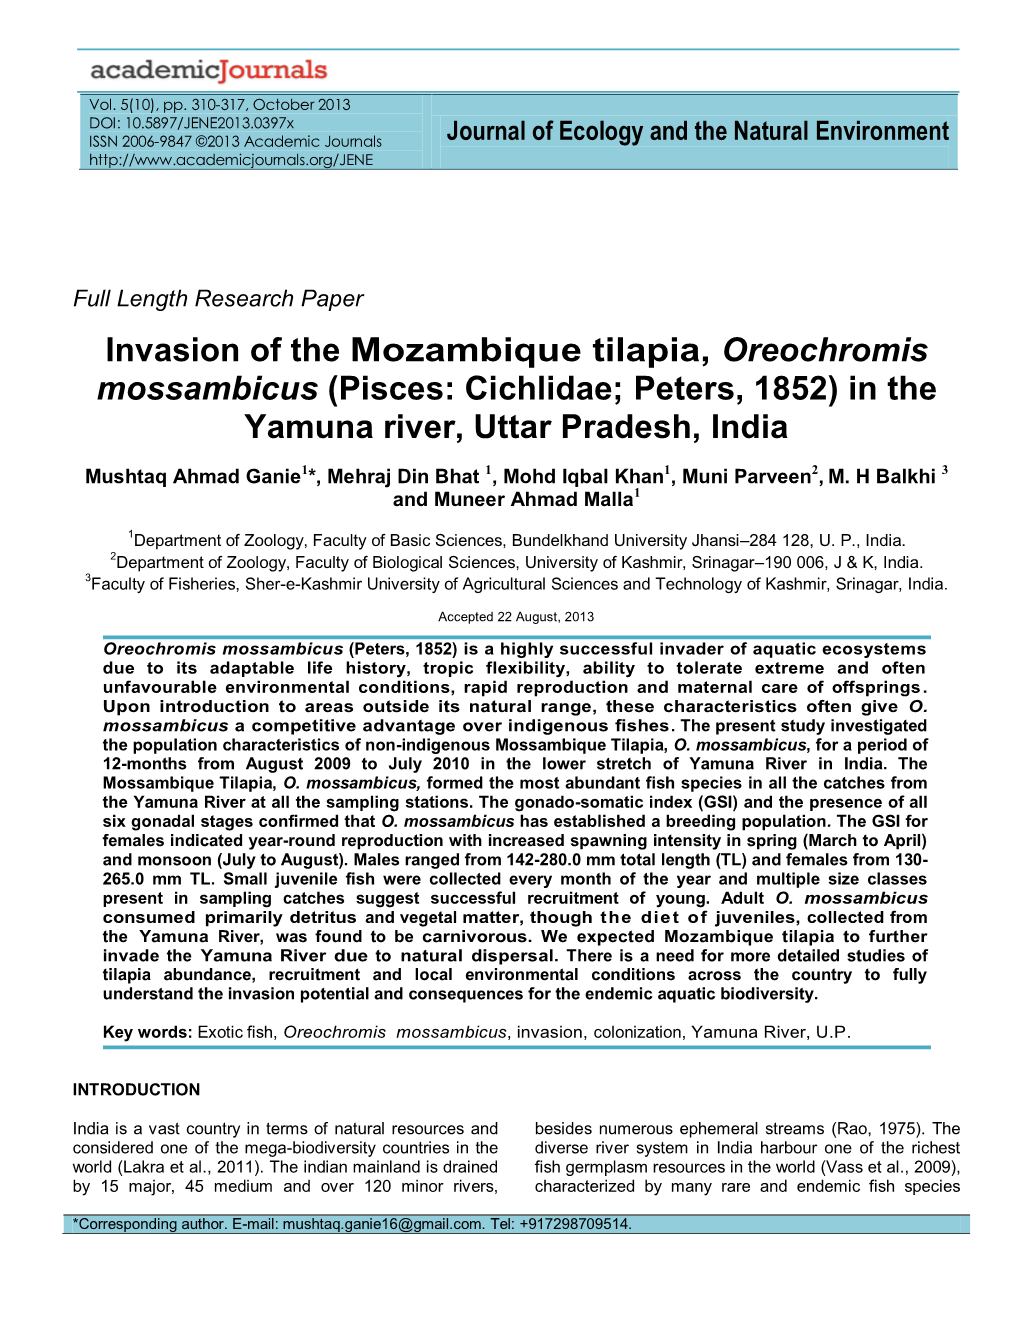 Invasion of the Mozambique Tilapia, Oreochromis Mossambicus (Pisces: Cichlidae; Peters, 1852) in the Yamuna River, Uttar Pradesh, India